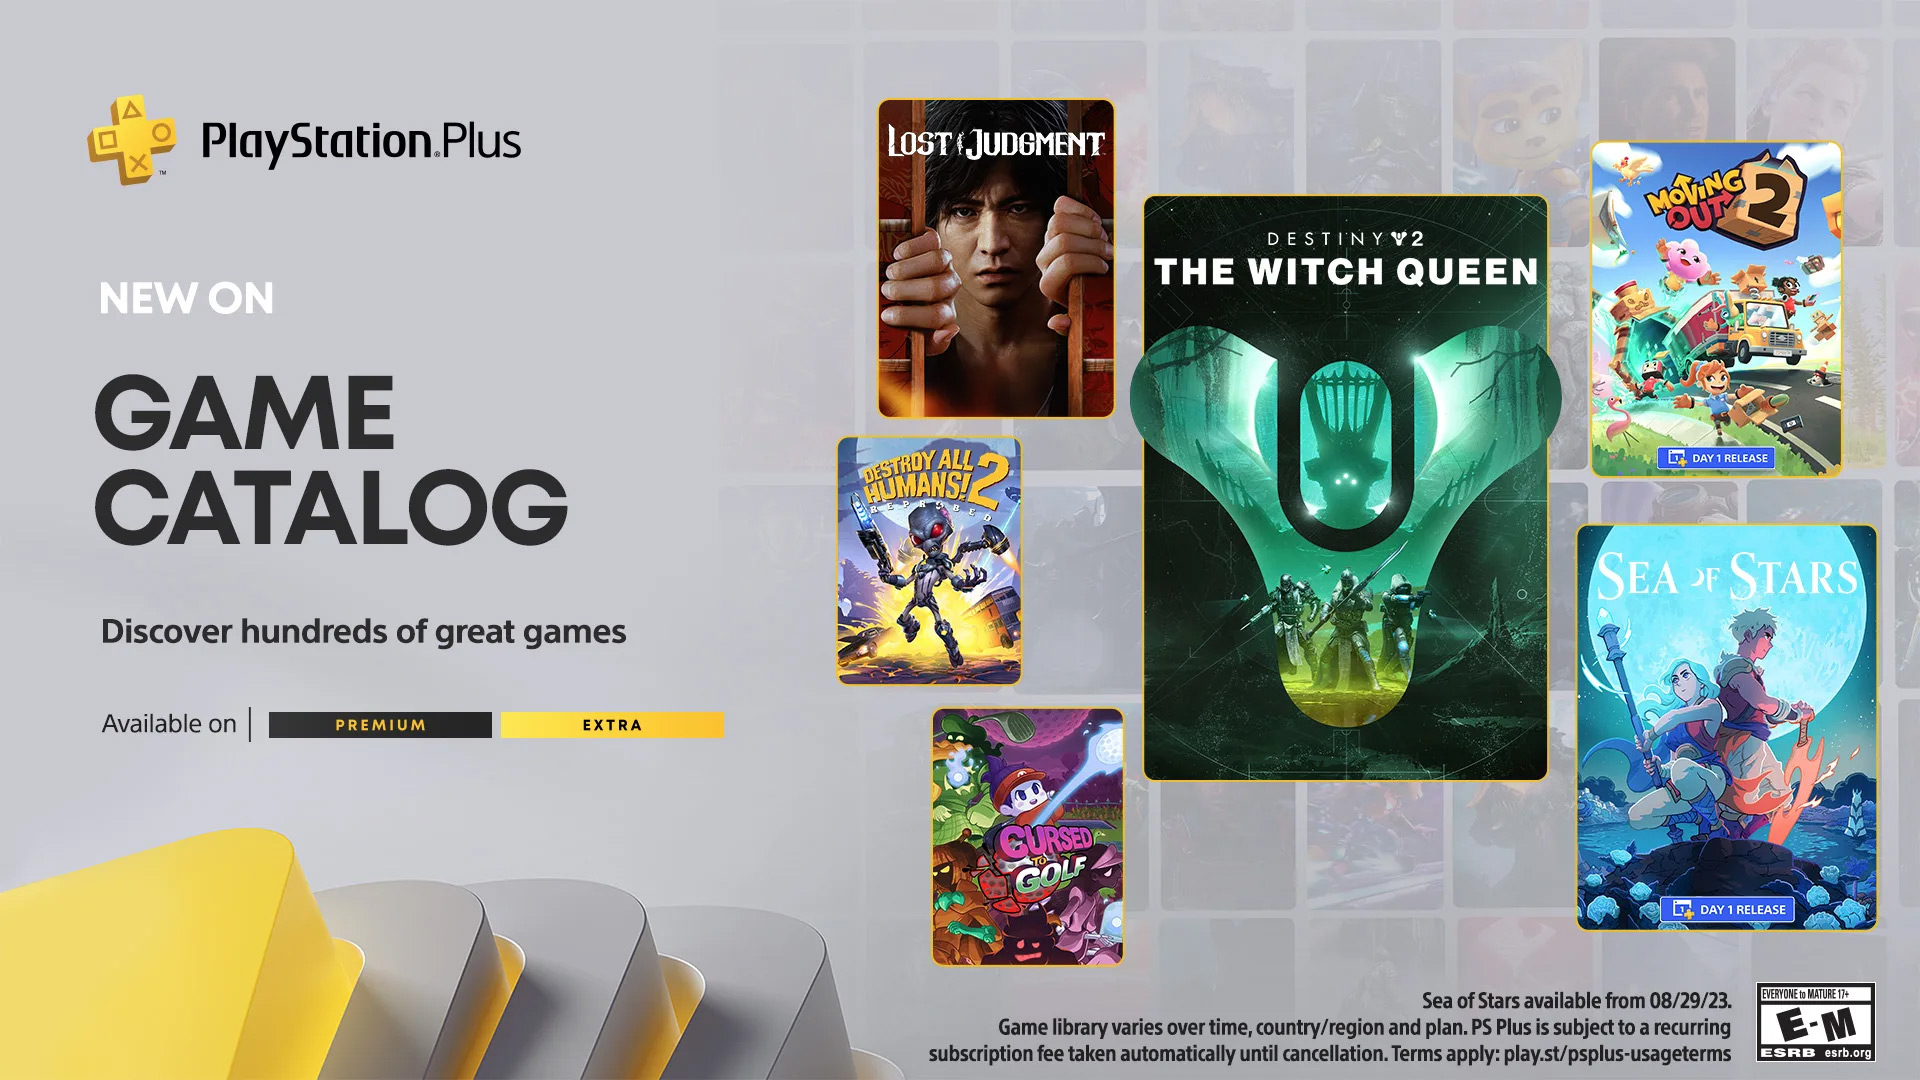 Sea of Stars, Moving Out 2, and Destiny 2: The Witch Queen are just some of the titles heading to PlayStation Plus in August